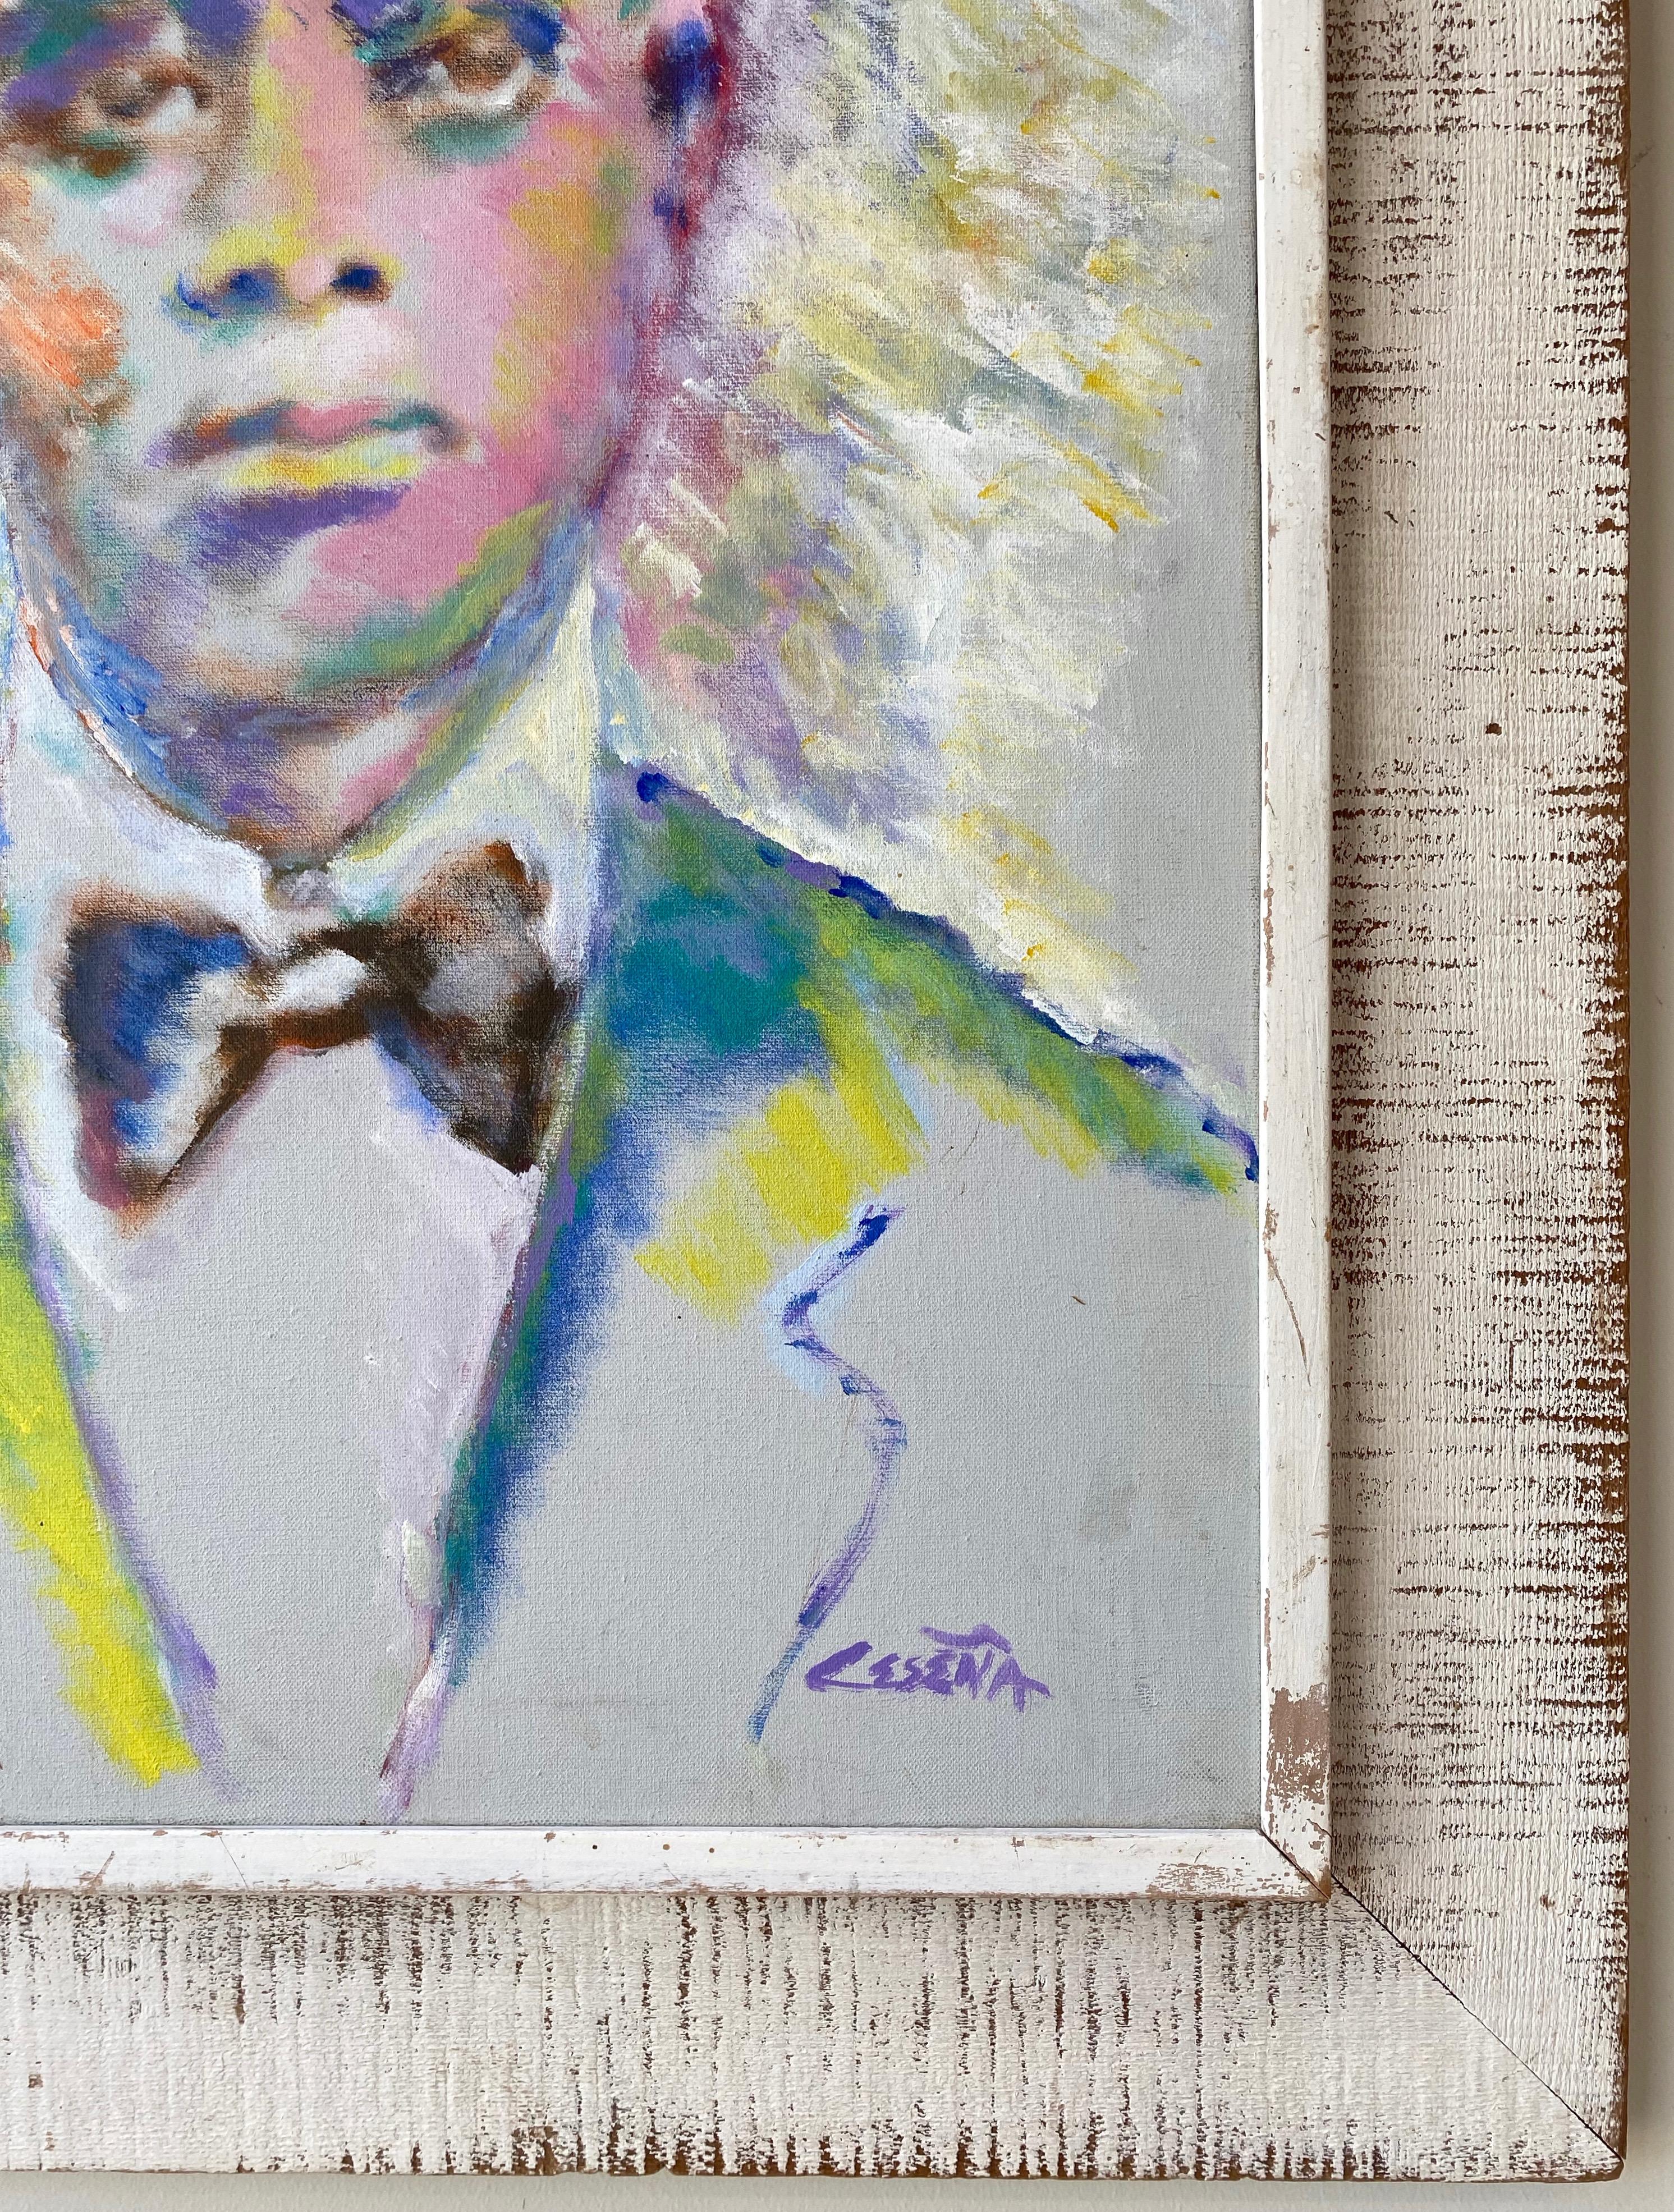 Ed Ceseña “King Oliver”, Large Fauvist Portrait Oil Painting, 1980s For Sale 3